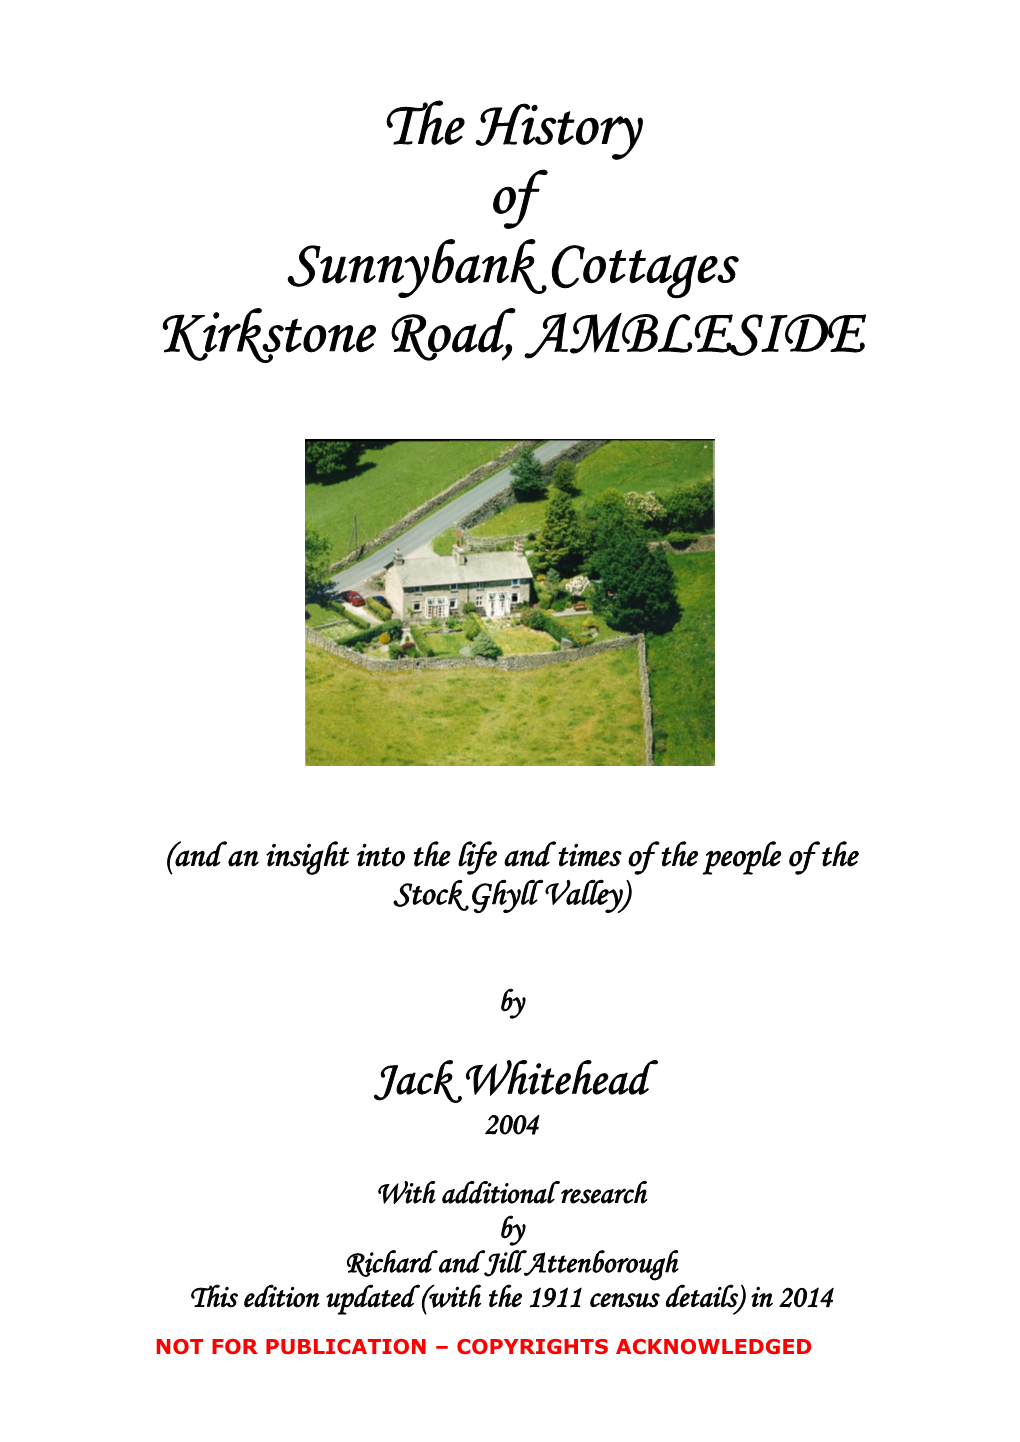 The History of Sunnybank Cottages Kirkstone Road, AMBLESIDE